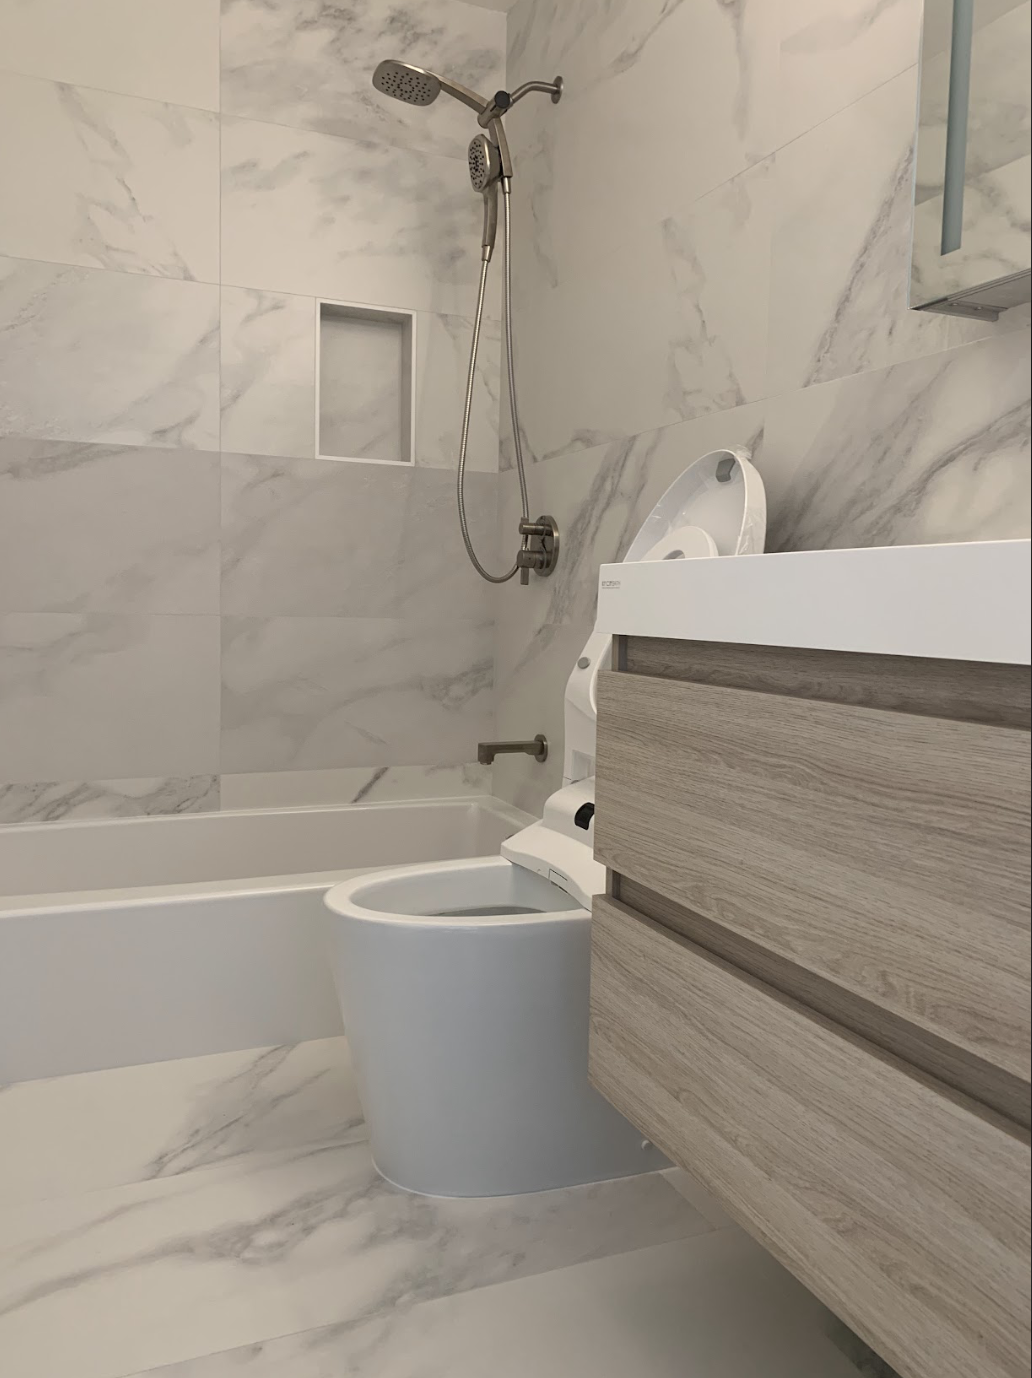 Things to Consider When Hiring Bathroom Remodeling Services